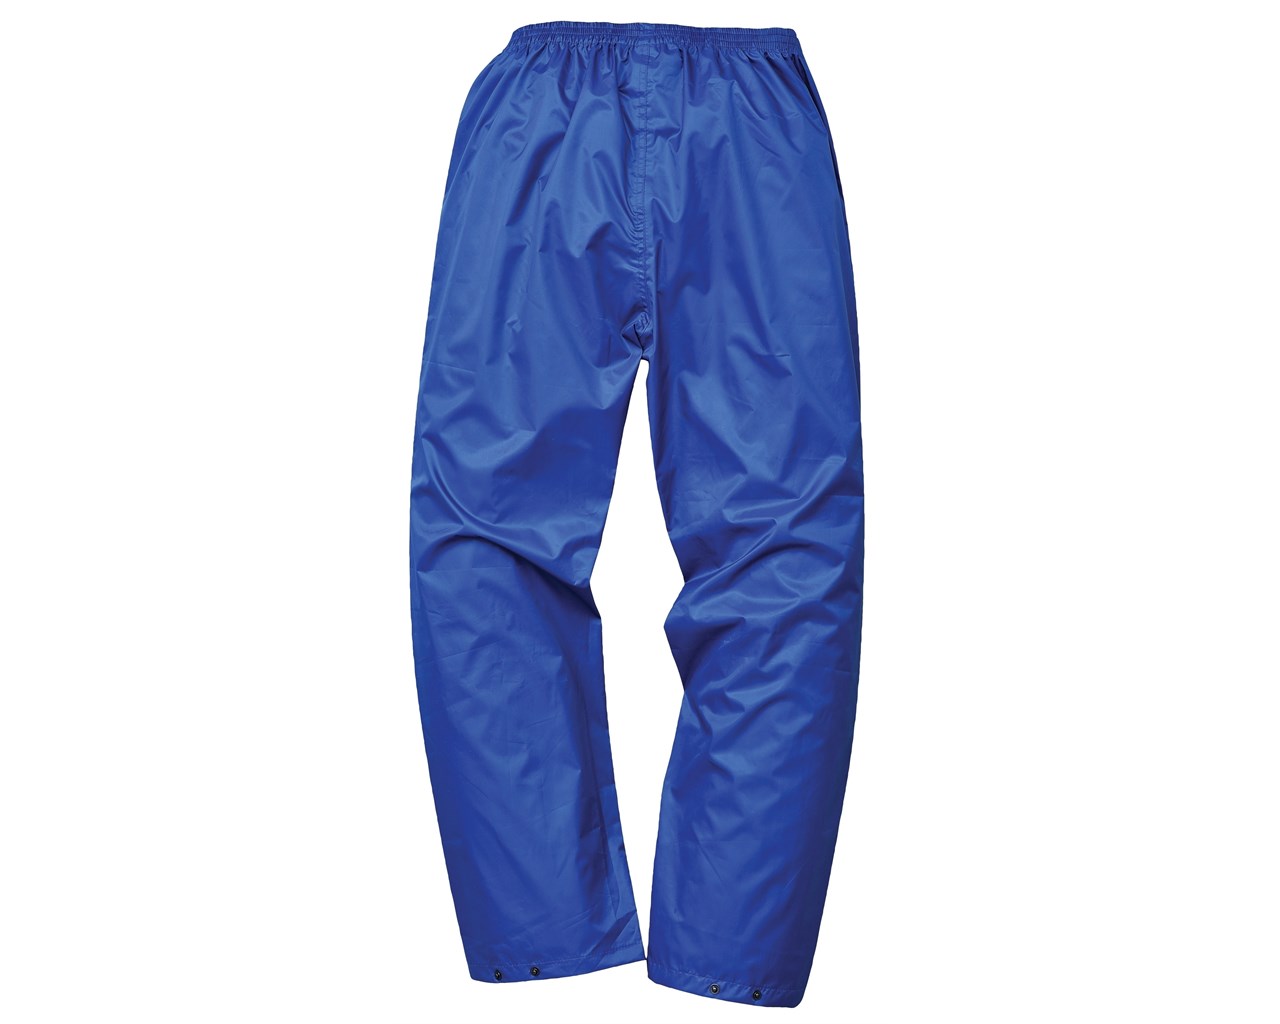 Portwest Classic Adult Rain Trousers | S441 - MammothCleaningSupplies.co.uk